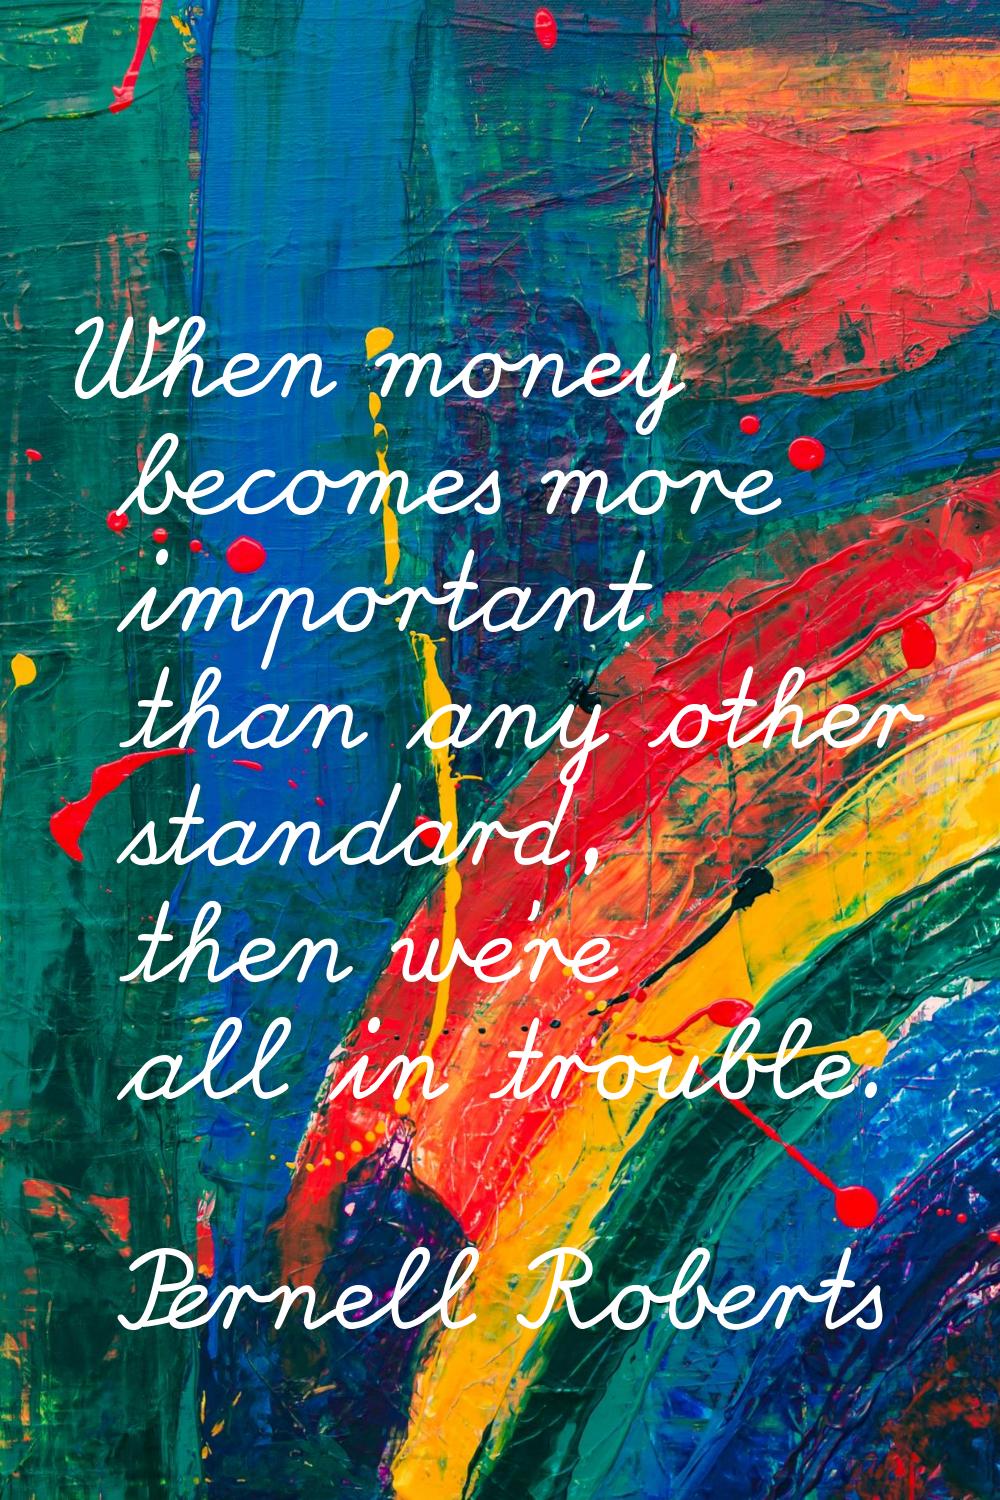 When money becomes more important than any other standard, then we're all in trouble.